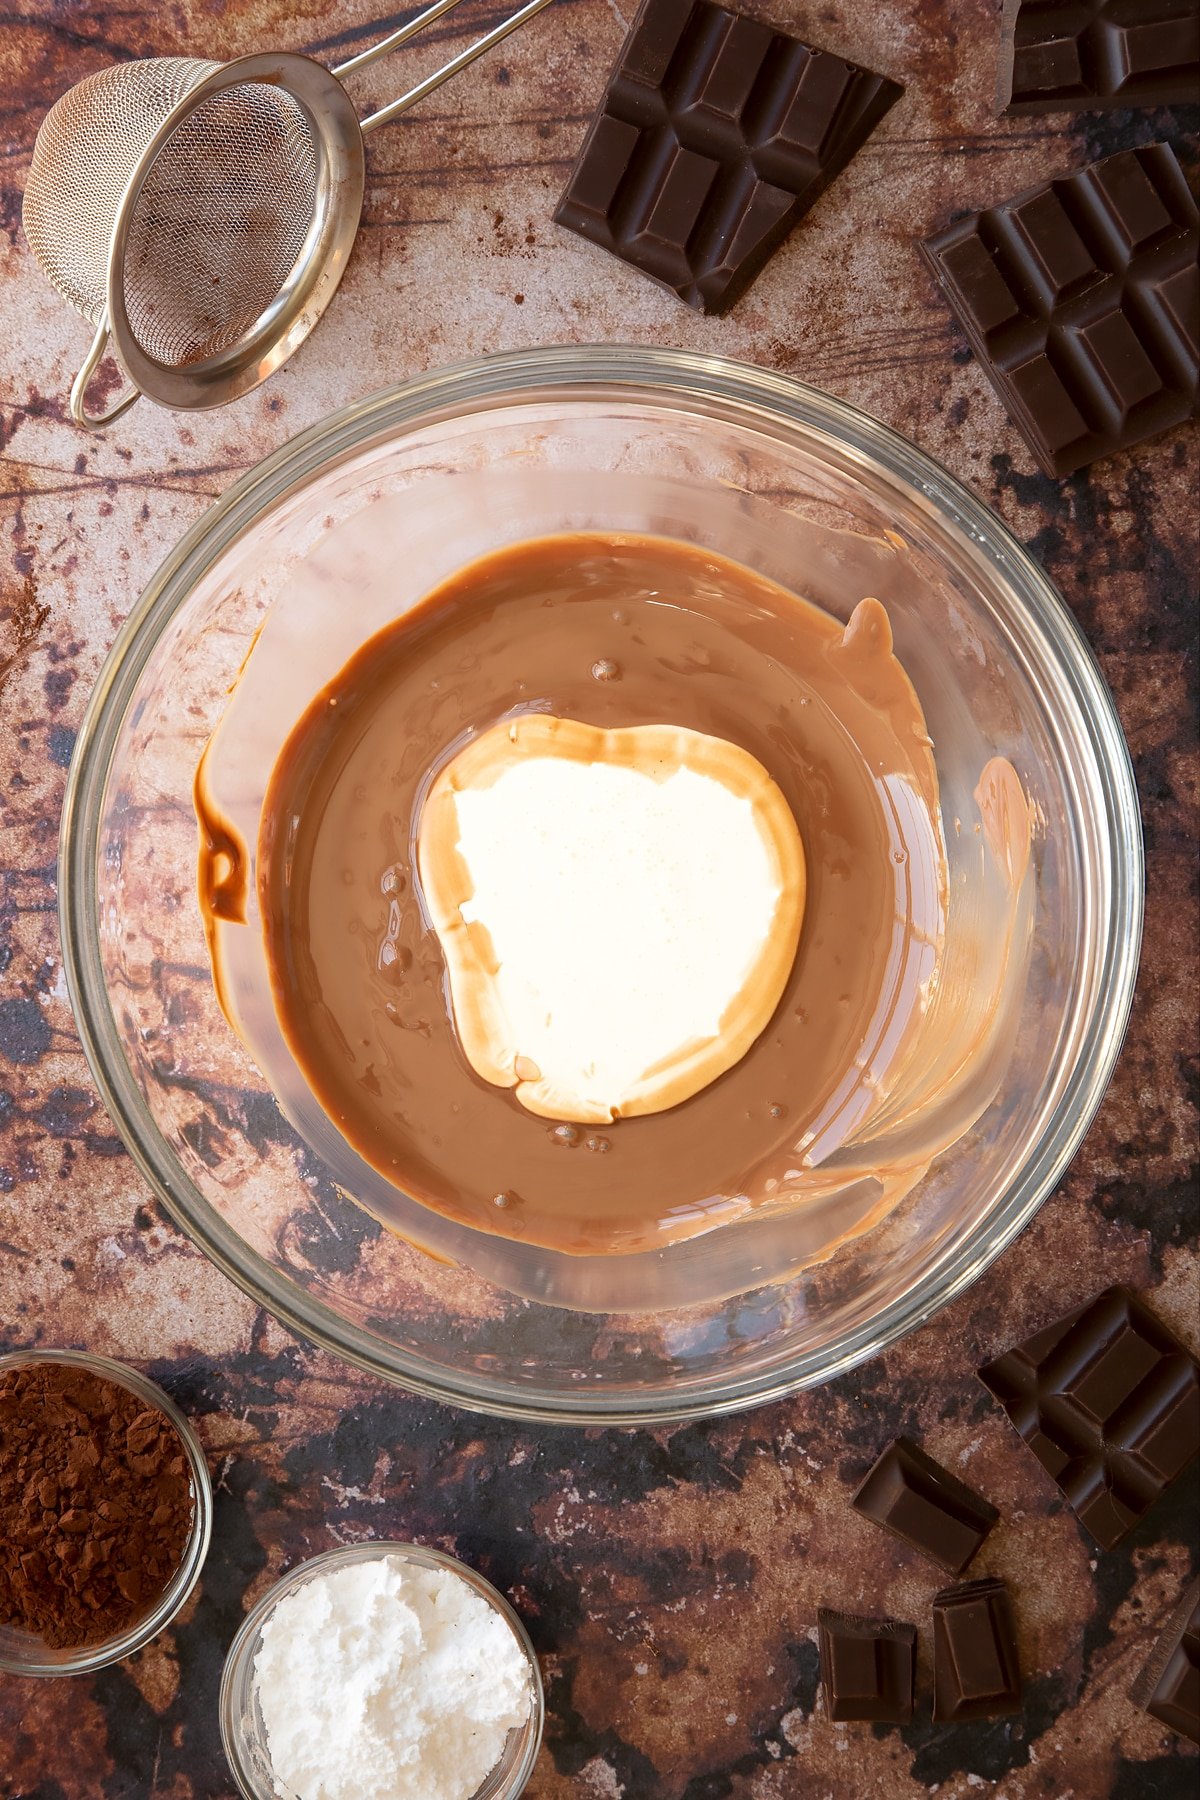 Melted chocolate in a glass mixing bowl with double cream on top. Ingredients for the caterpillar cake recipe surround the bowl.